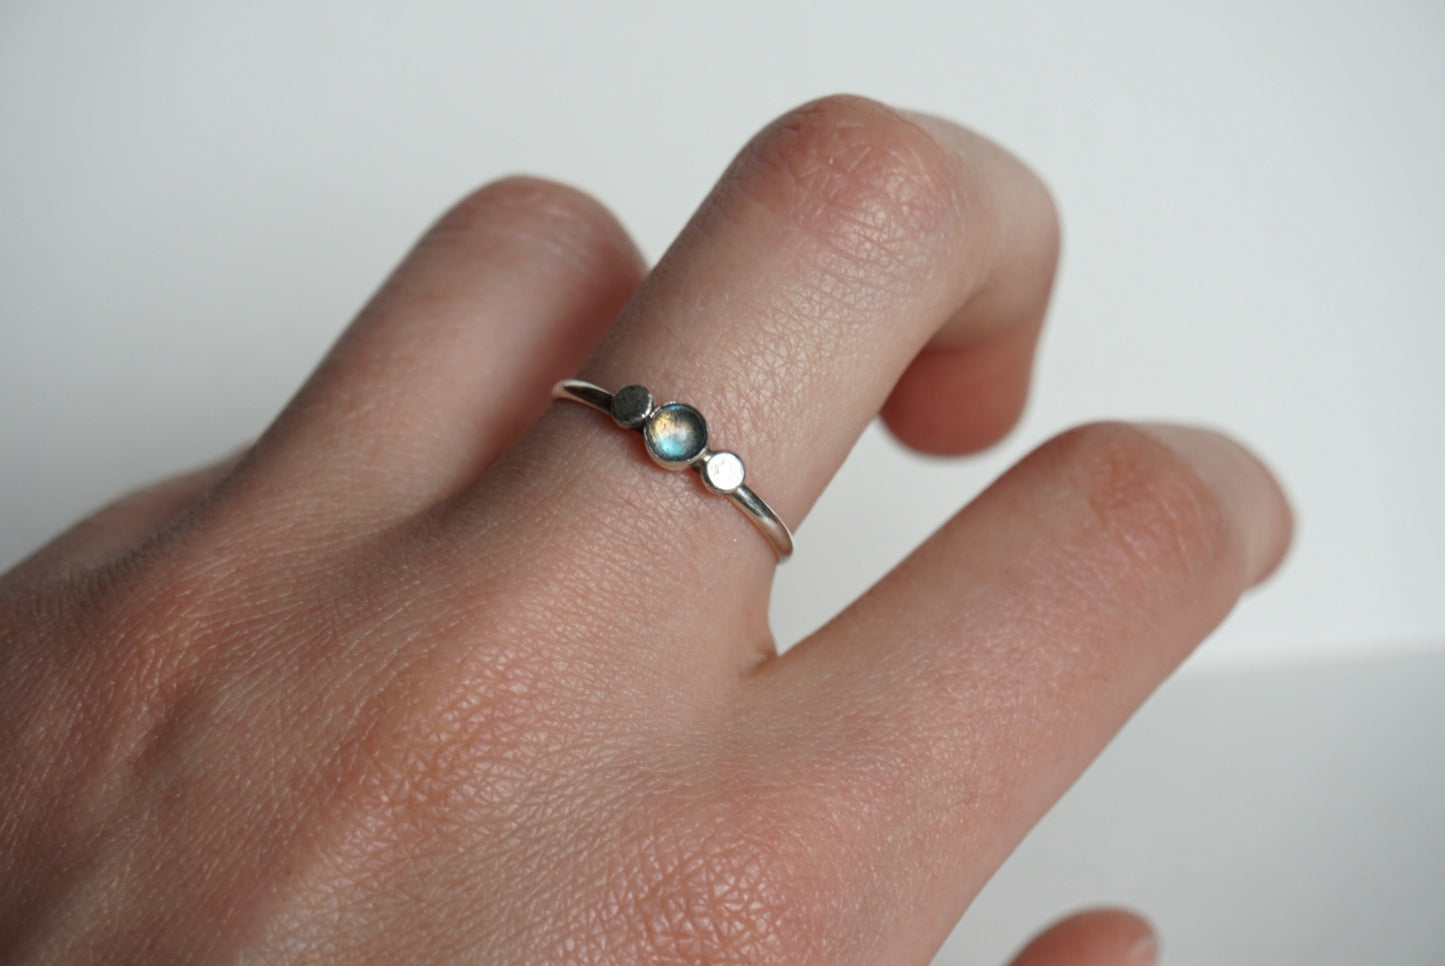 Sterling silver stacker ring with labradorite